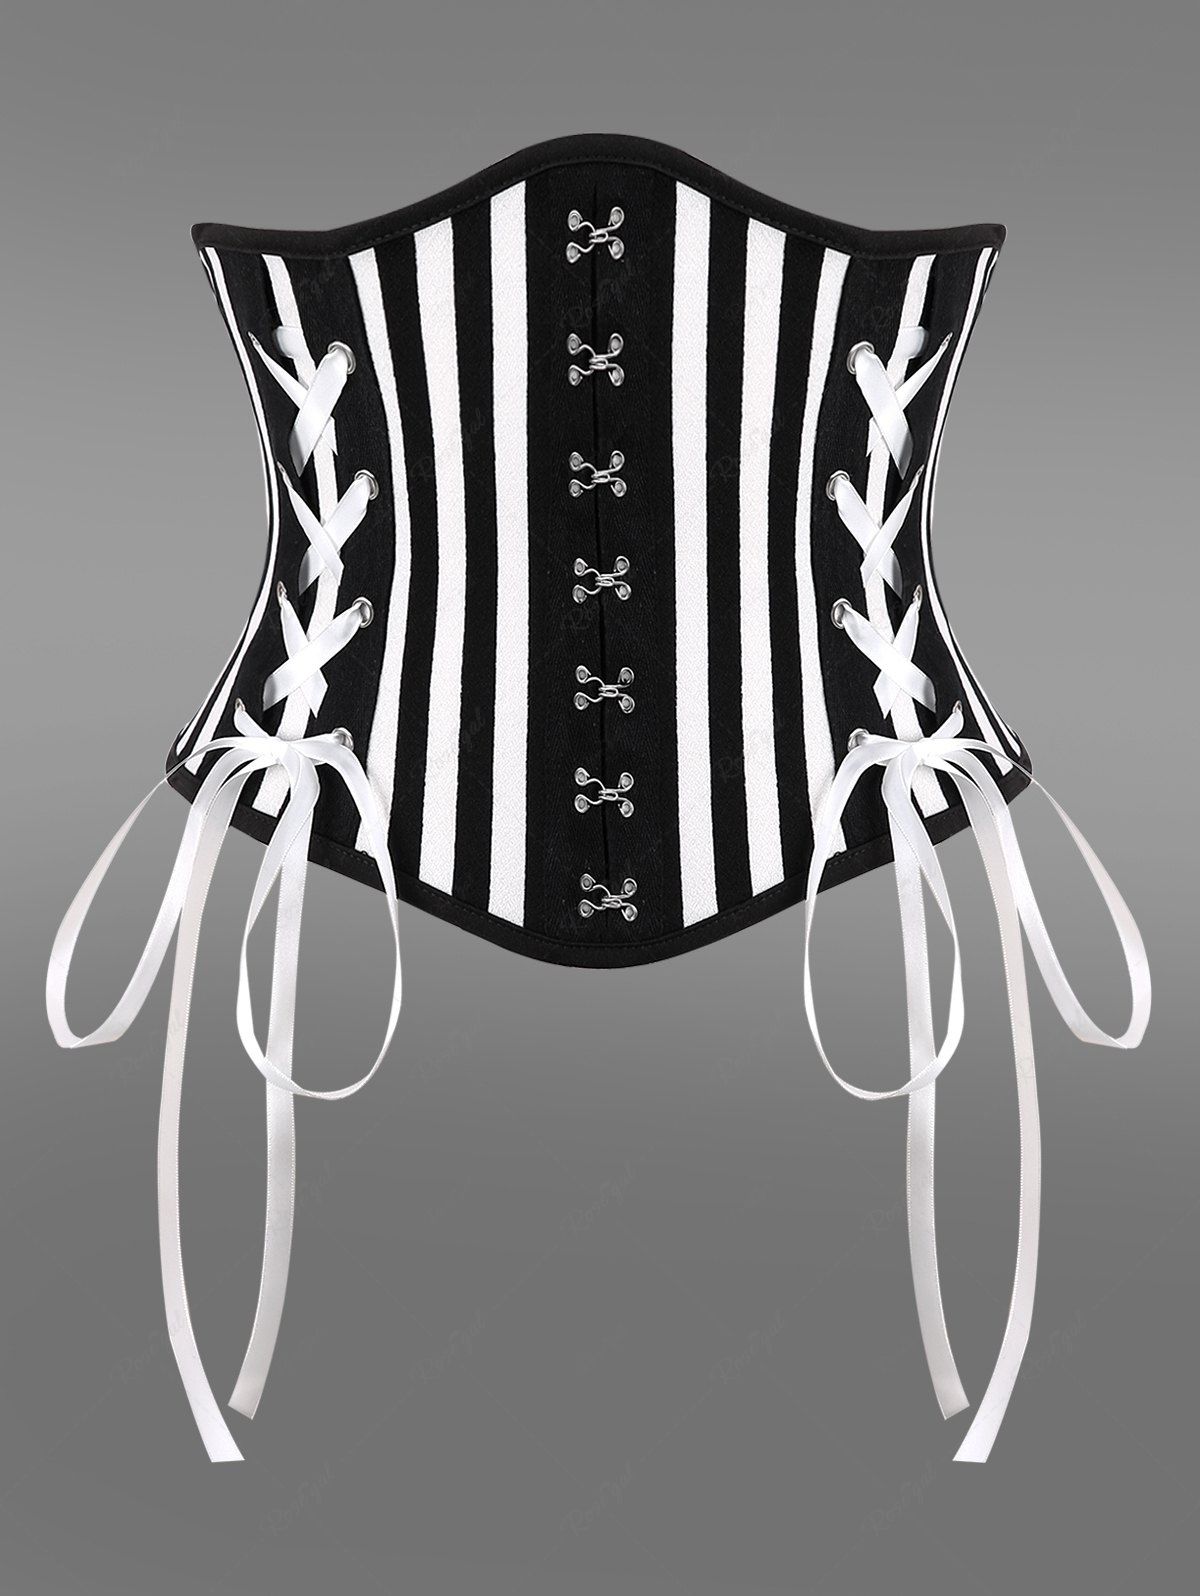 Gothic Striped Print Grommets Lace Up Hook and Eye Buckle Corset